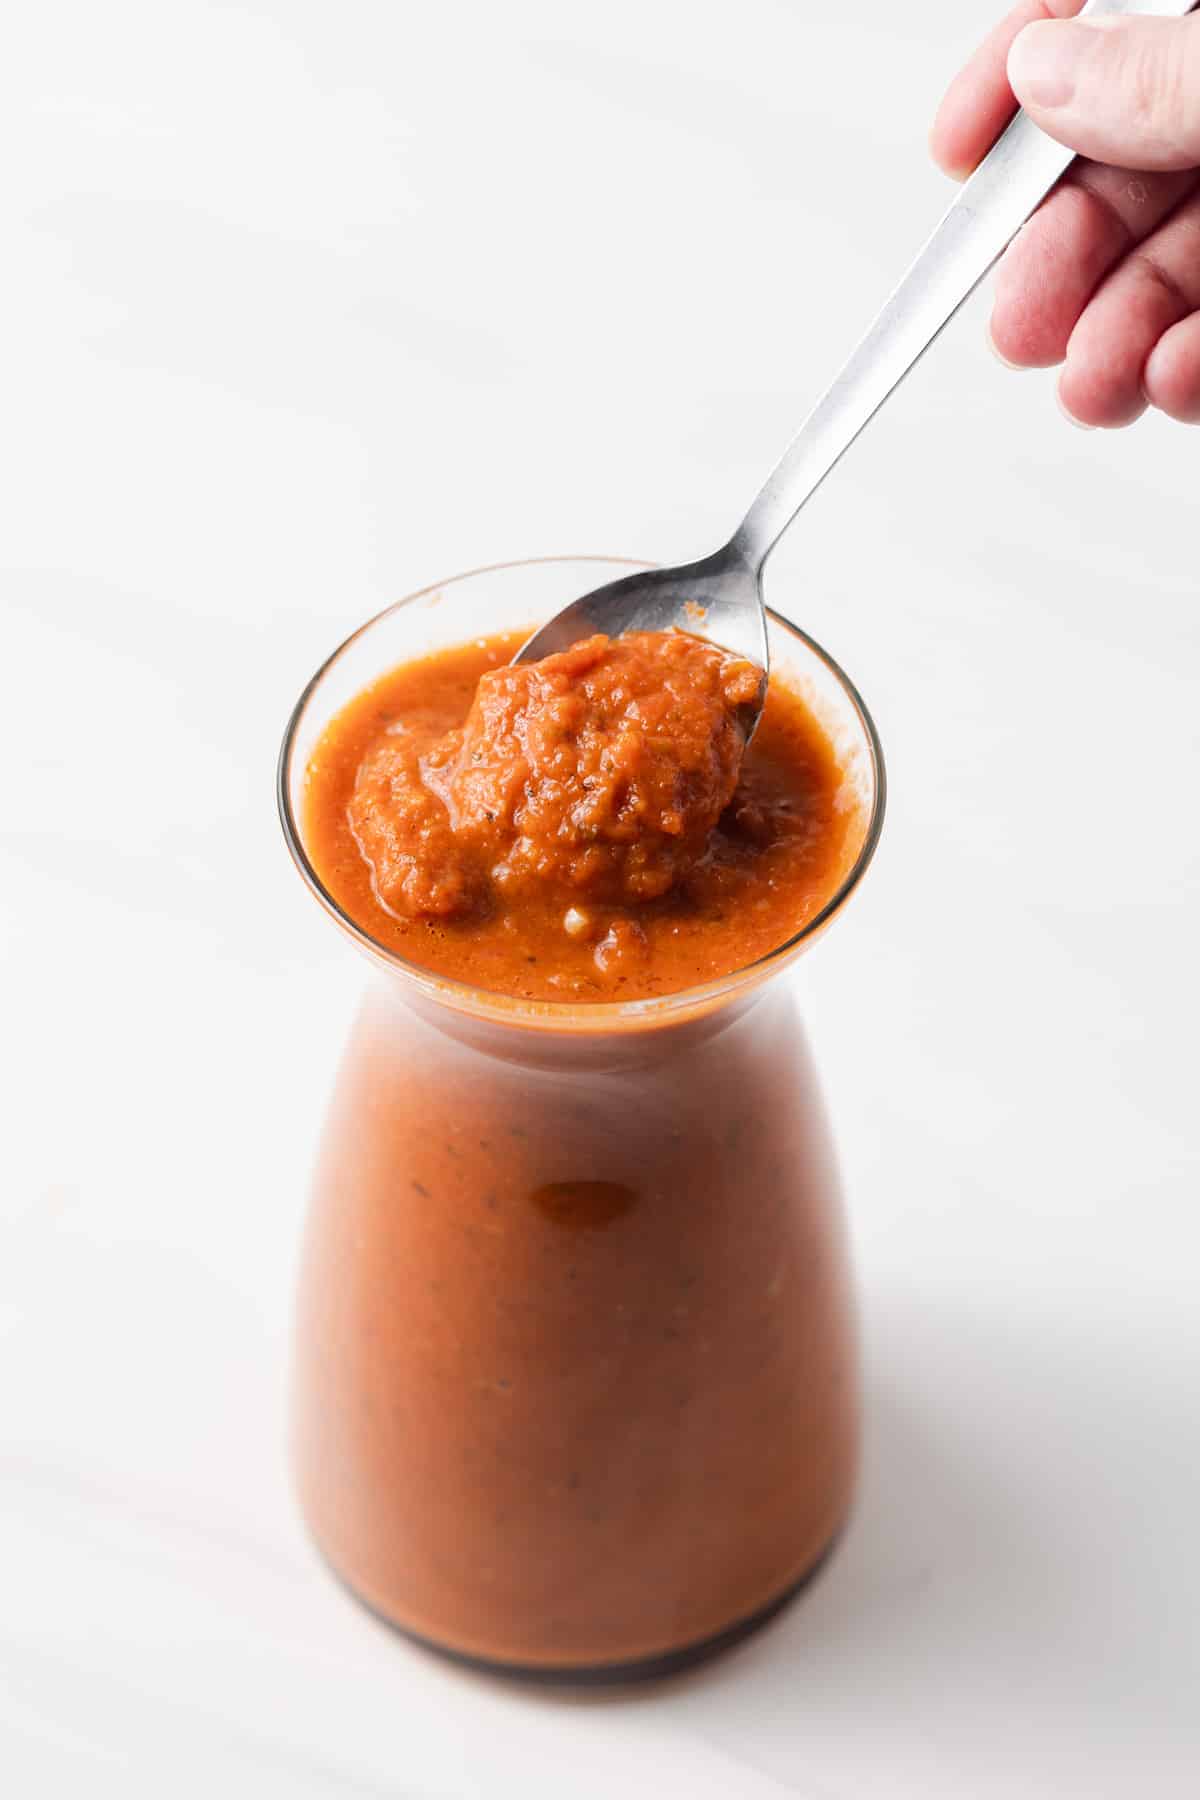 Spoon taking out ranchero sauce out of jar.